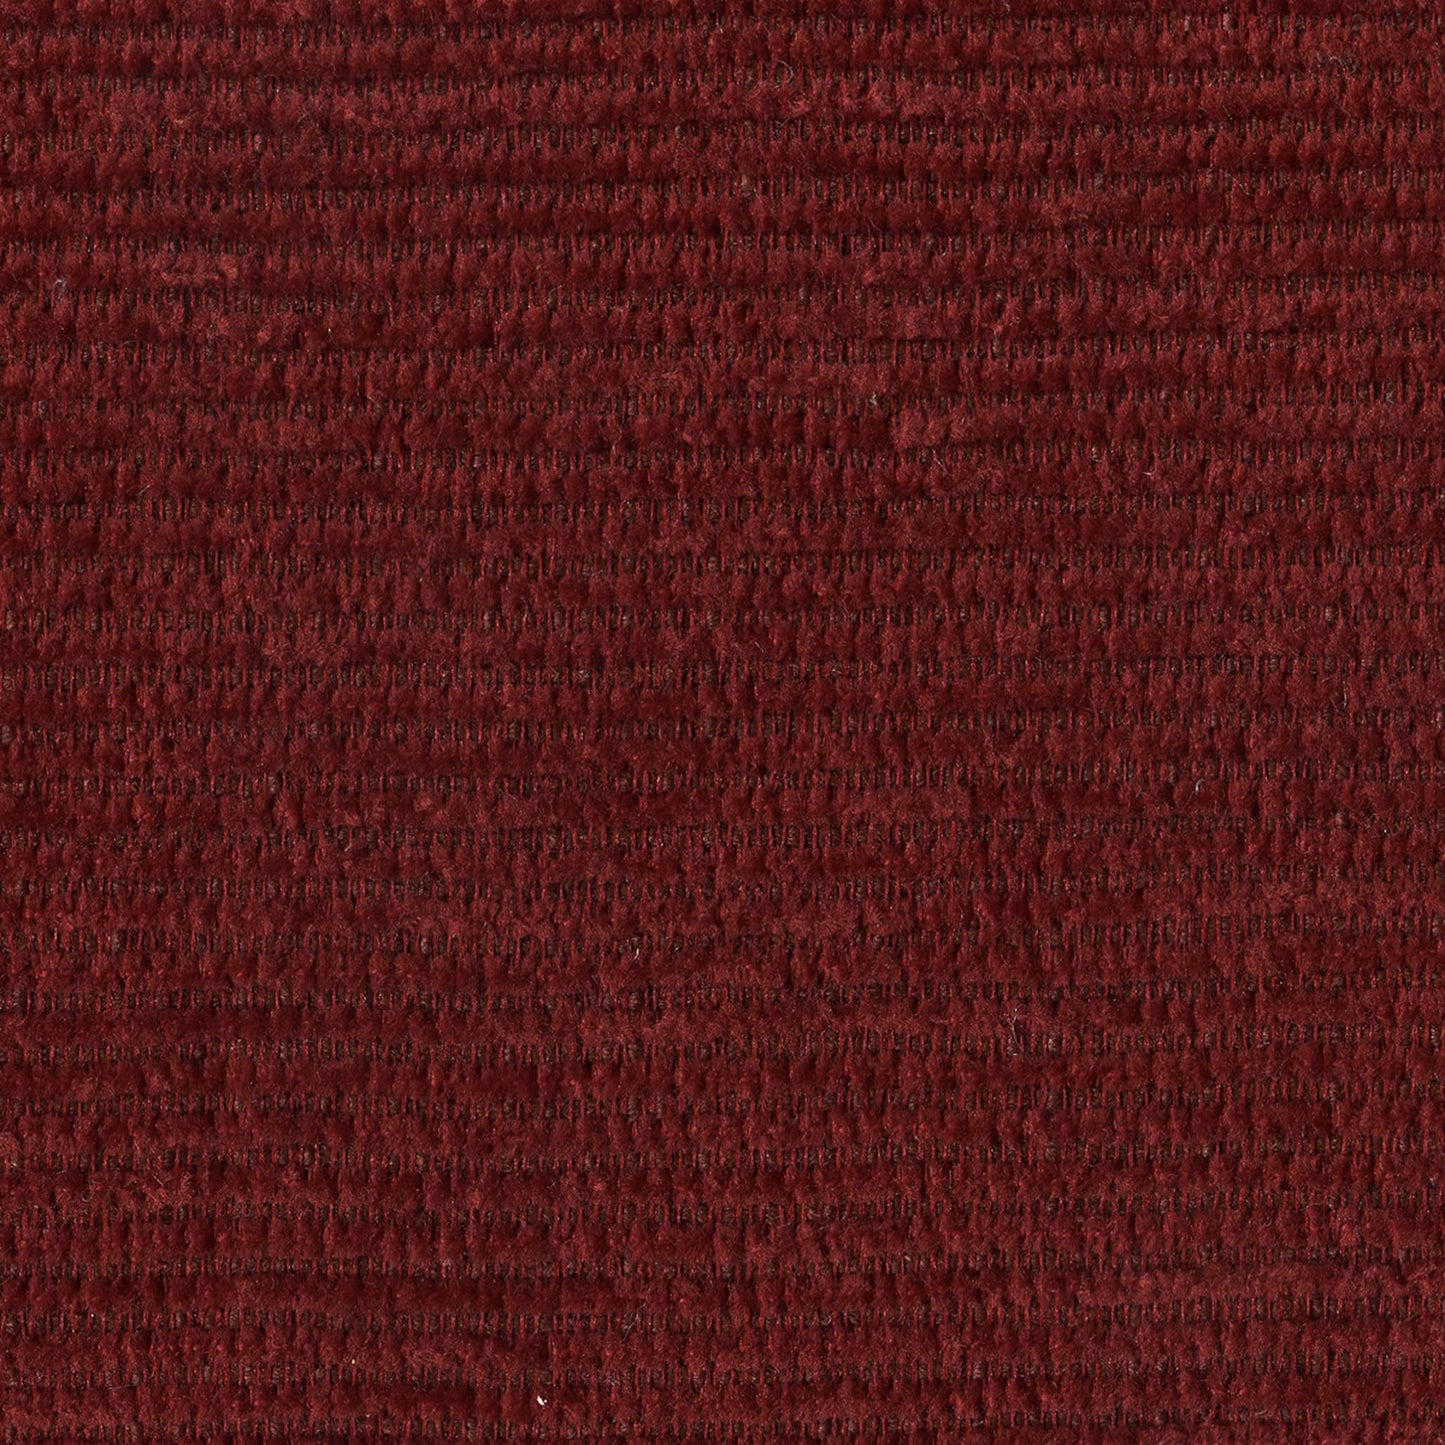 02 Chenille Rib Claret Red 61 Swatch